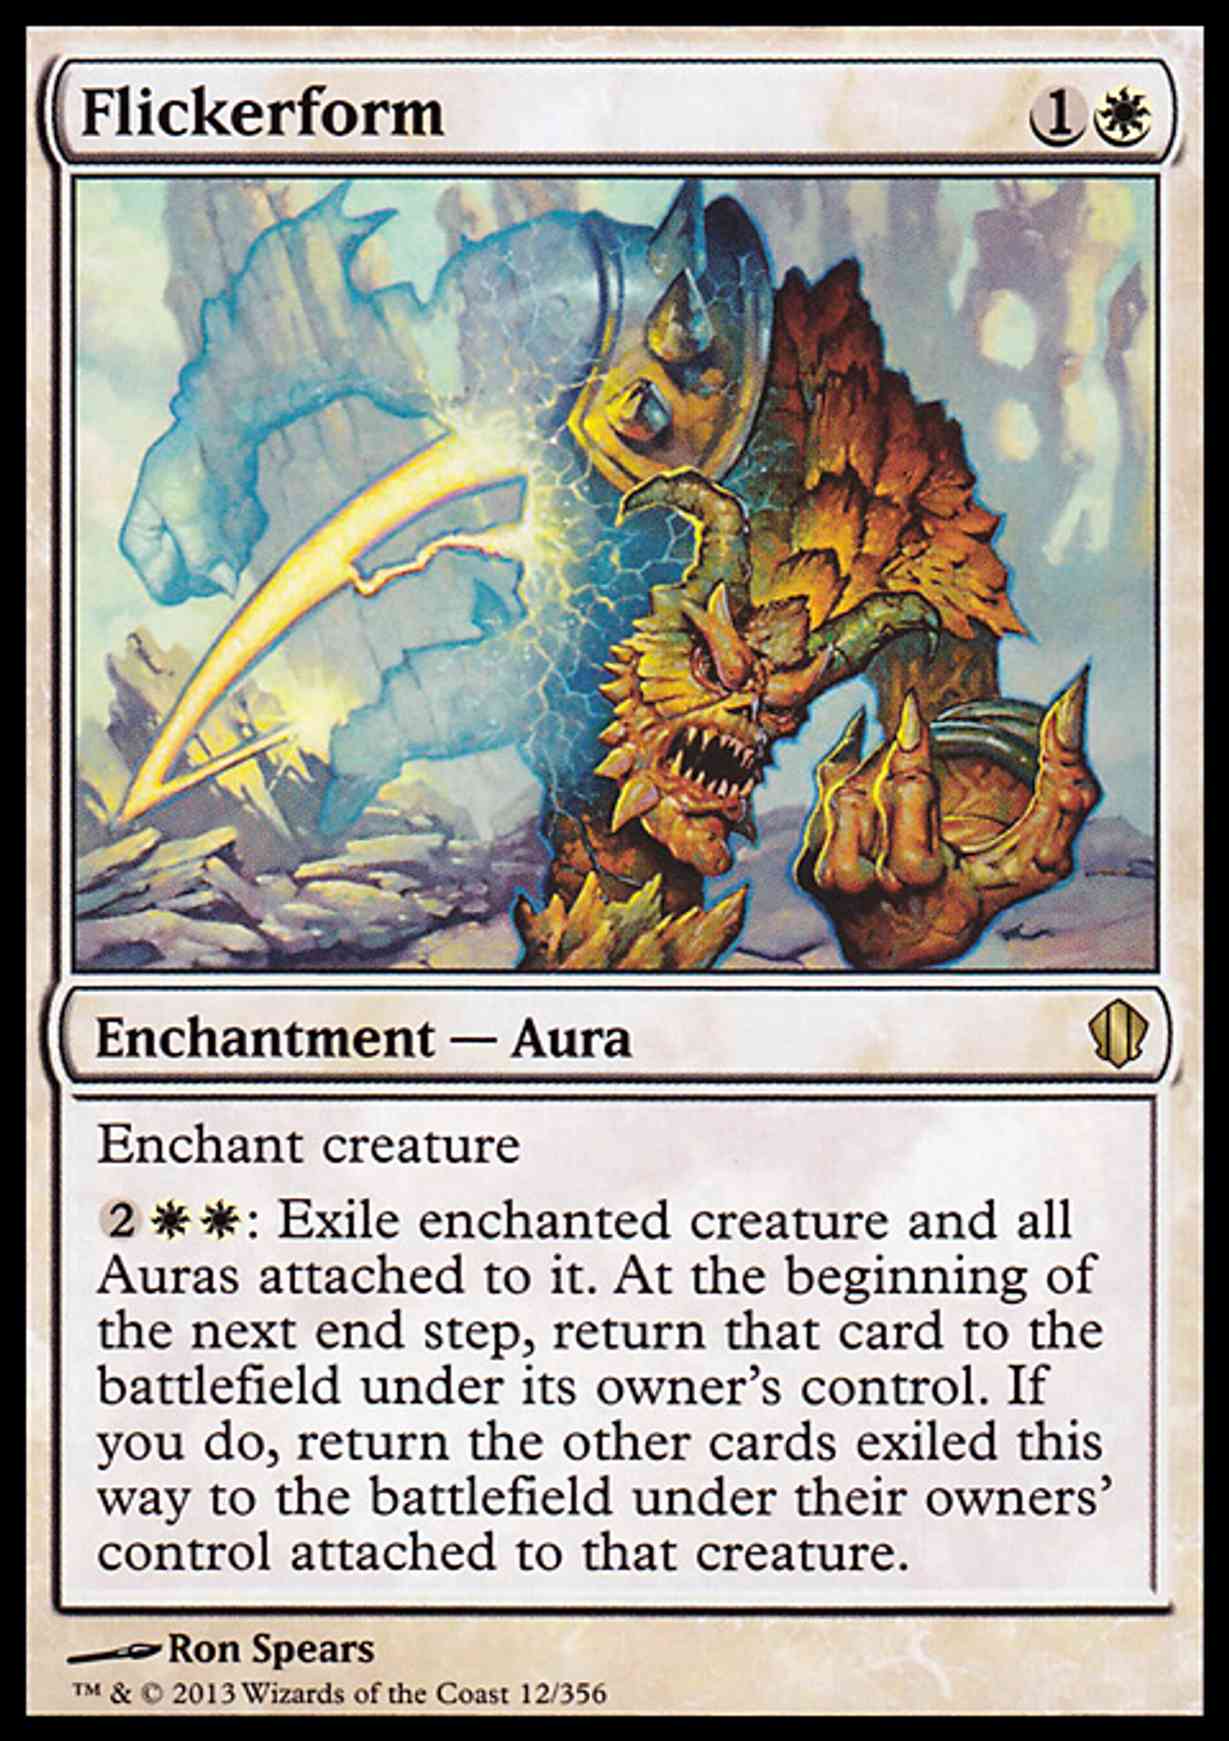 Flickerform magic card front